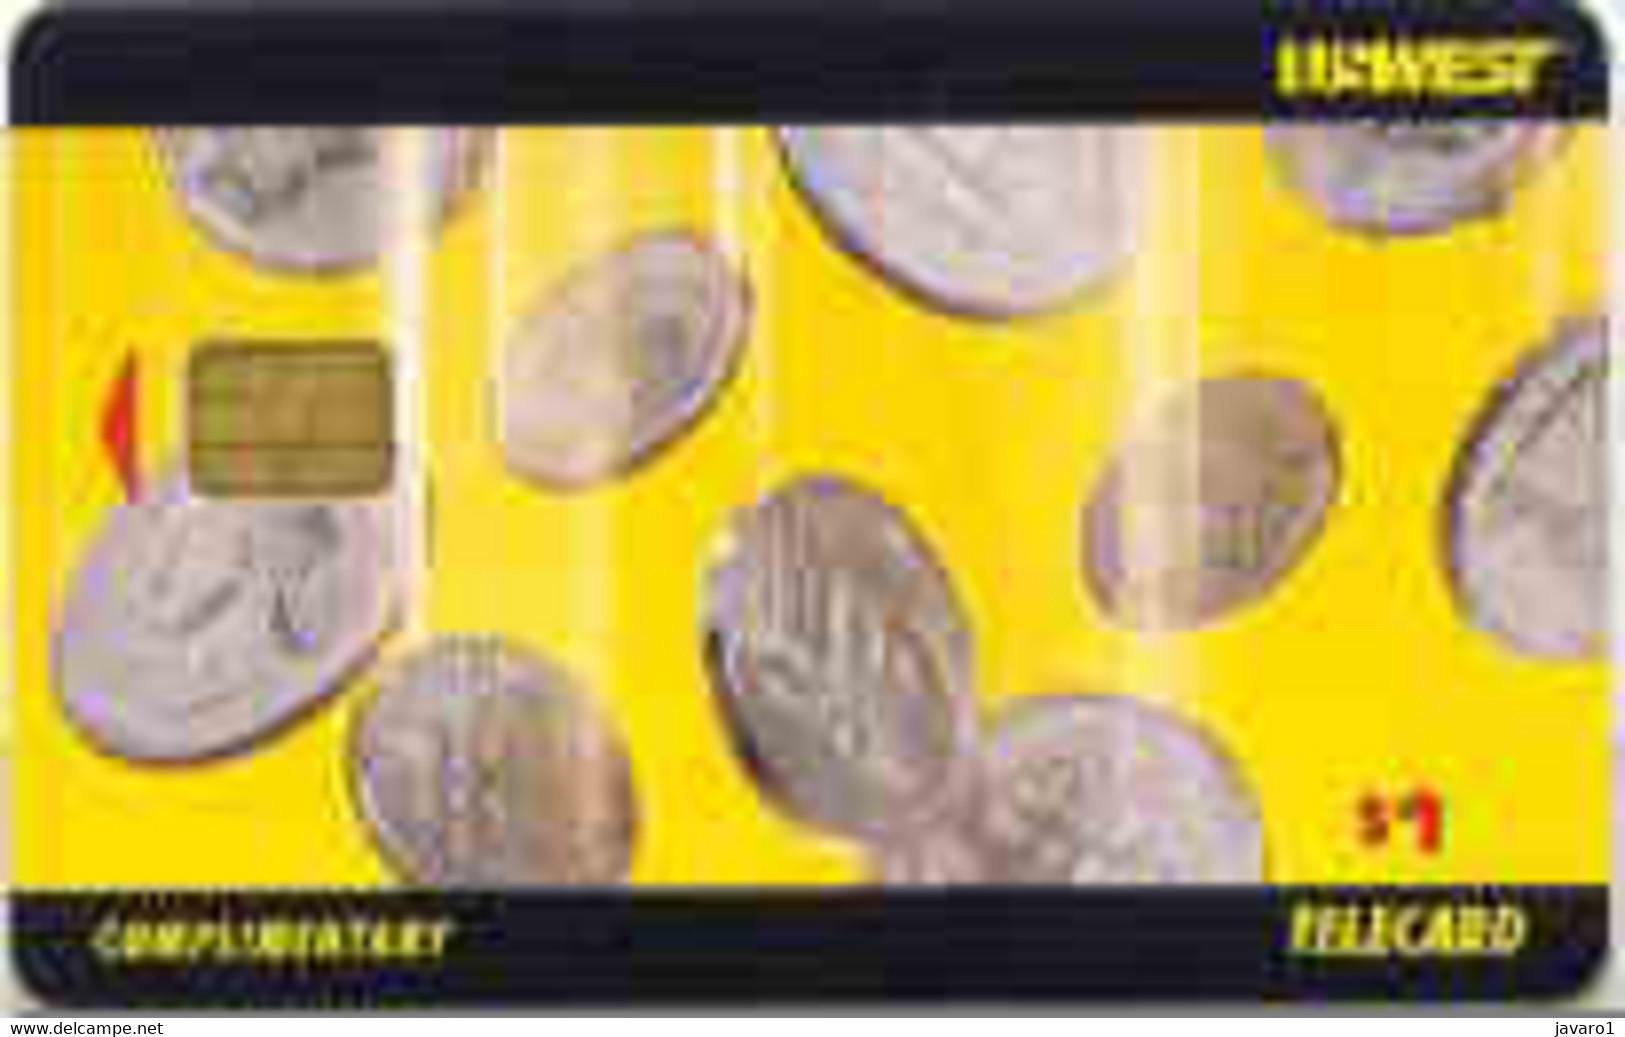 USWEST : UW023 $1 (no CARDEX Logo) Complimentary Coins MINT - [2] Chip Cards